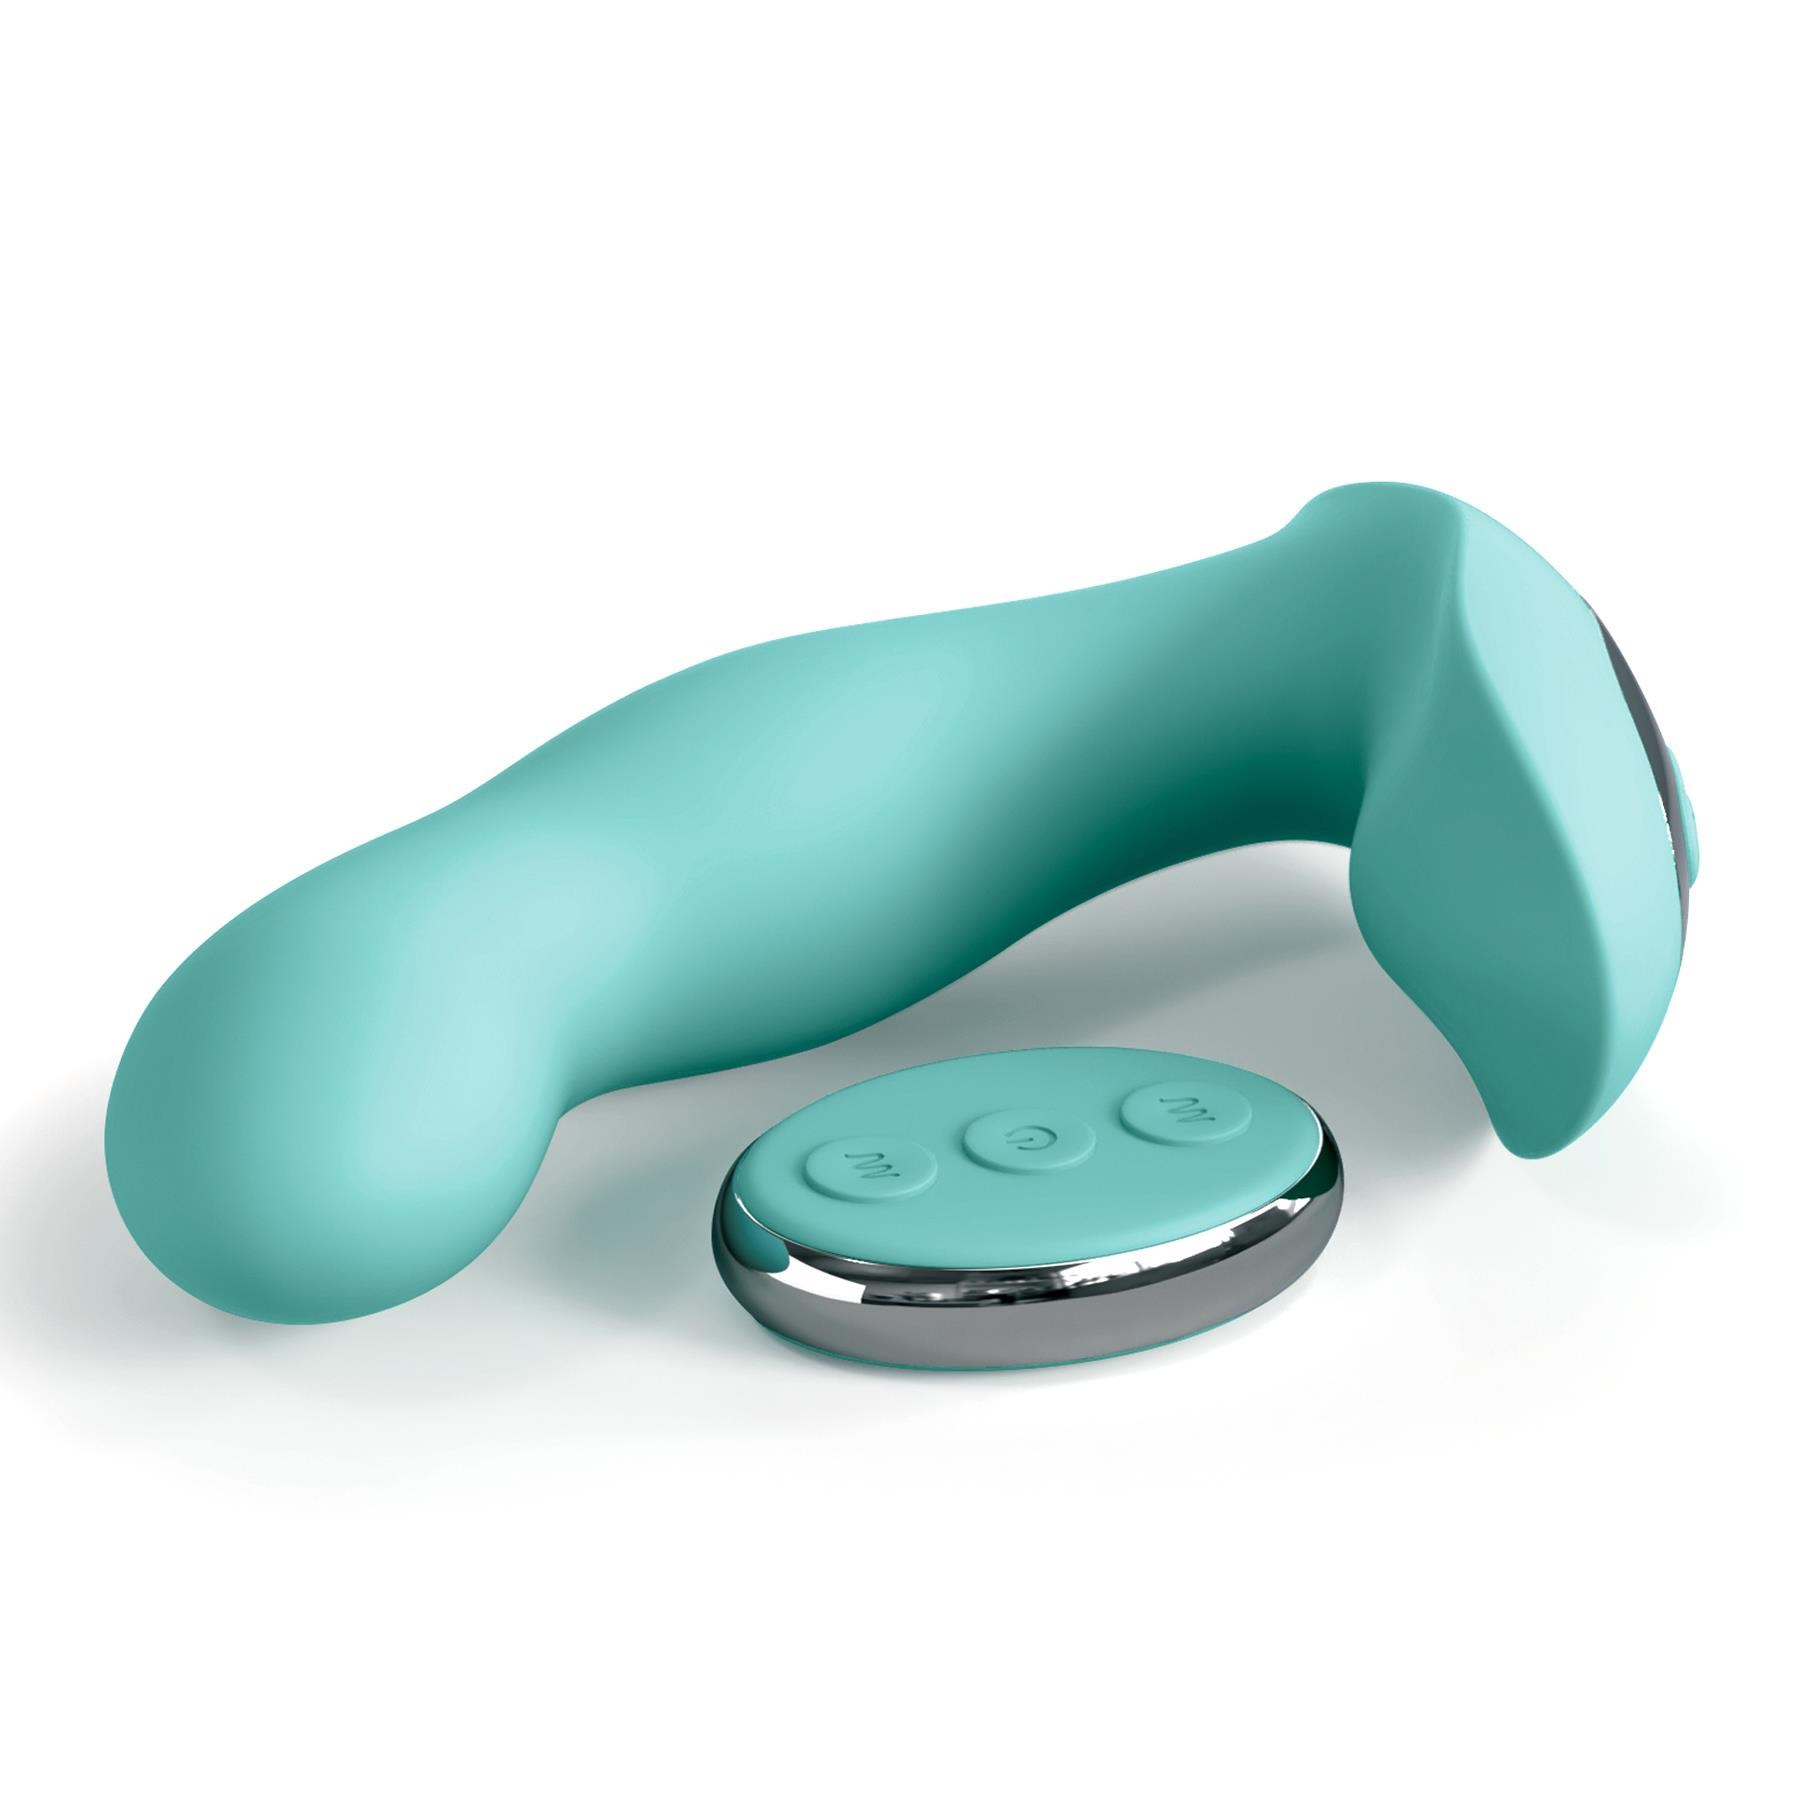 Jimmy Jane Pulsus G-Spot Vibrator With Remote Control - Product and Remote